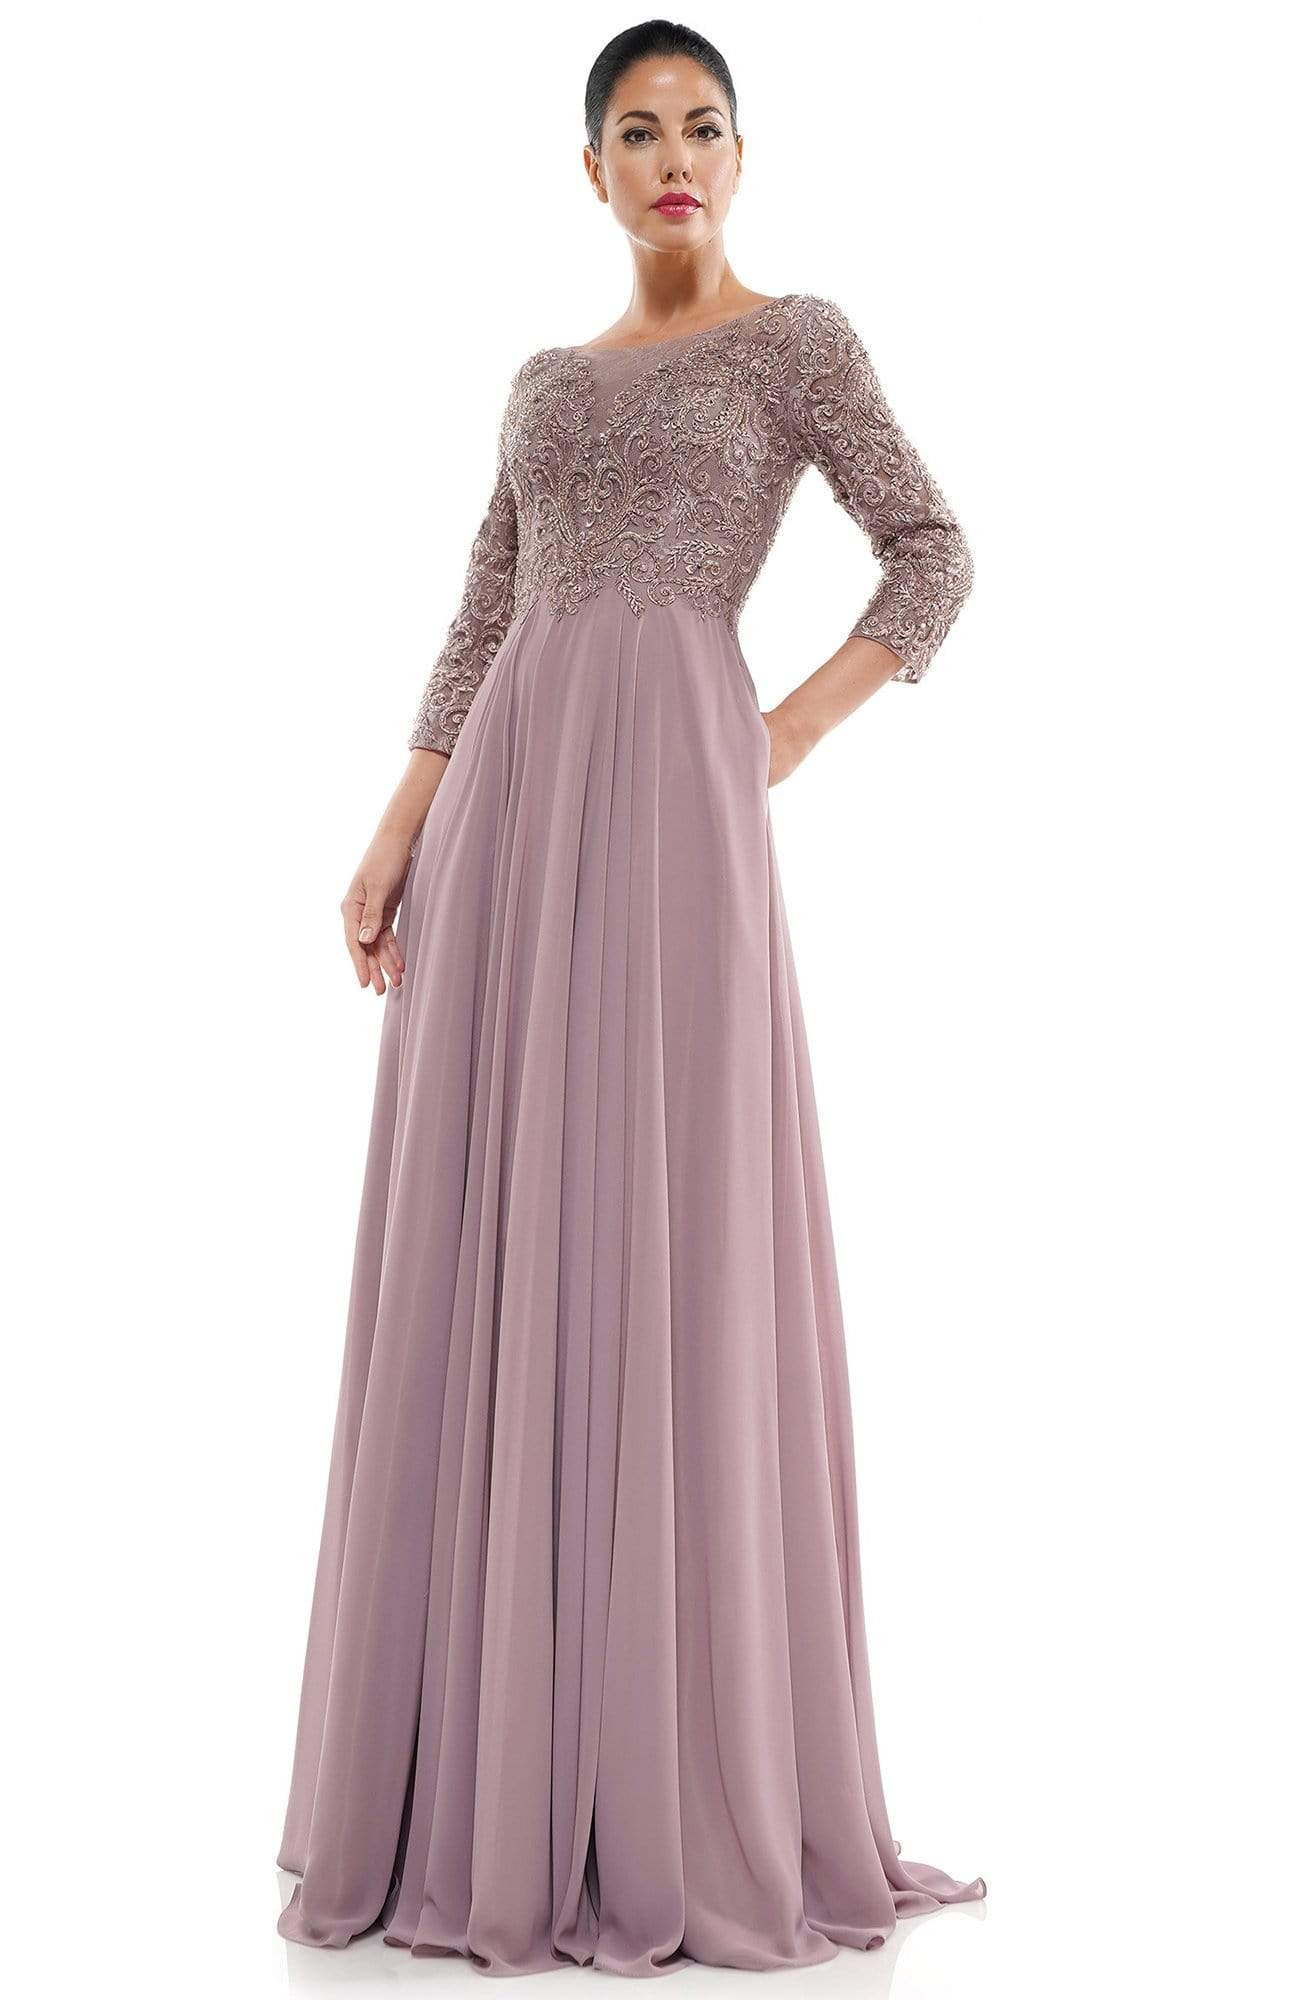 Marsoni by Colors - Quarter Sleeve Embroidered Lace Bodice A-Line Chiffon Gown MV1052 - 1 pc Mauve In Size 6 Available CCSALE 6 / Mauve